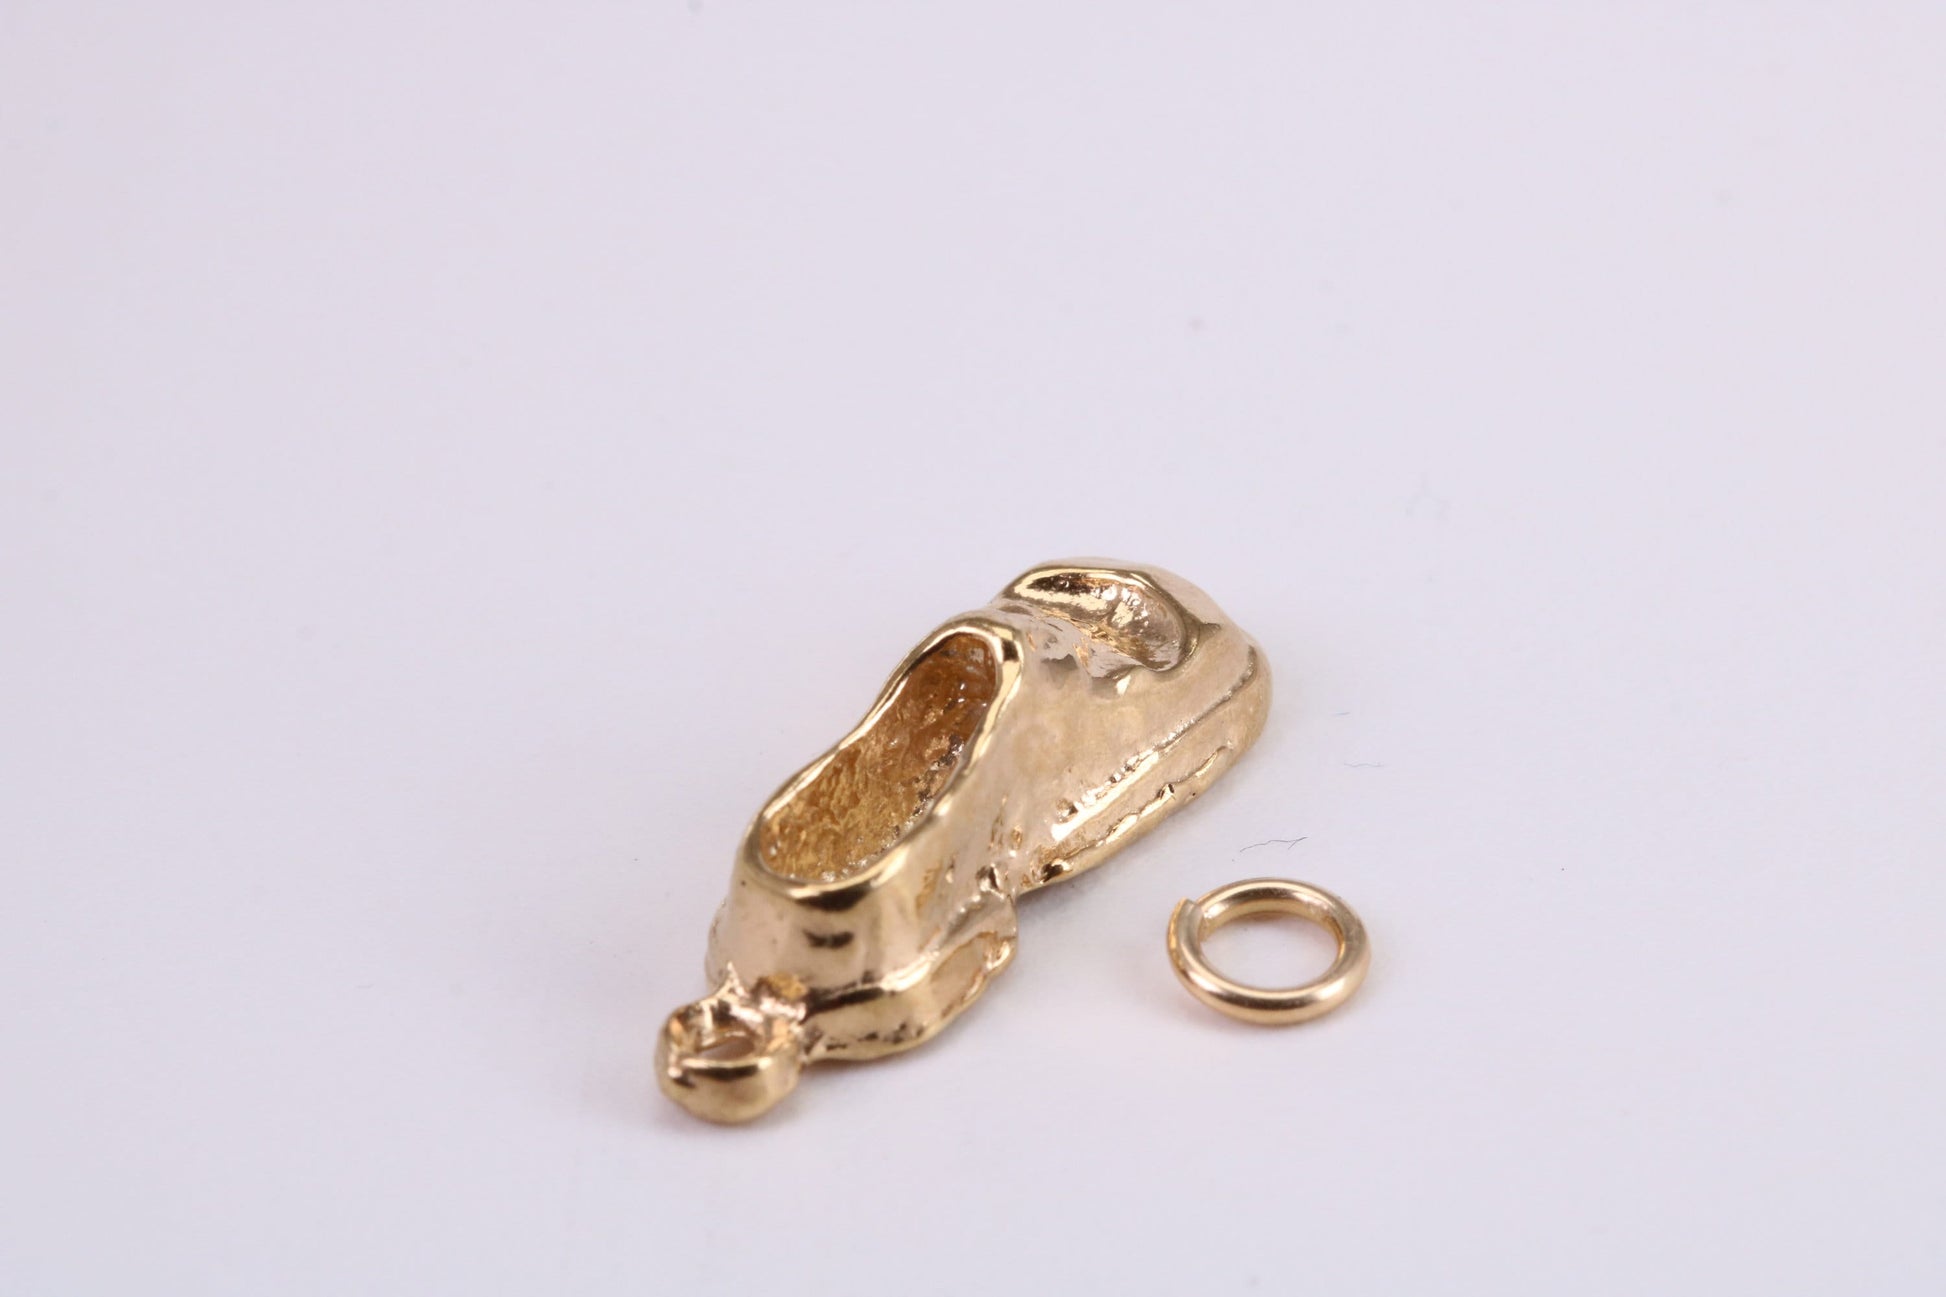 Old Shoe Charm, Traditional Charm, Made from Solid Yellow Gold, British Hallmarked, Complete with Attachment Link